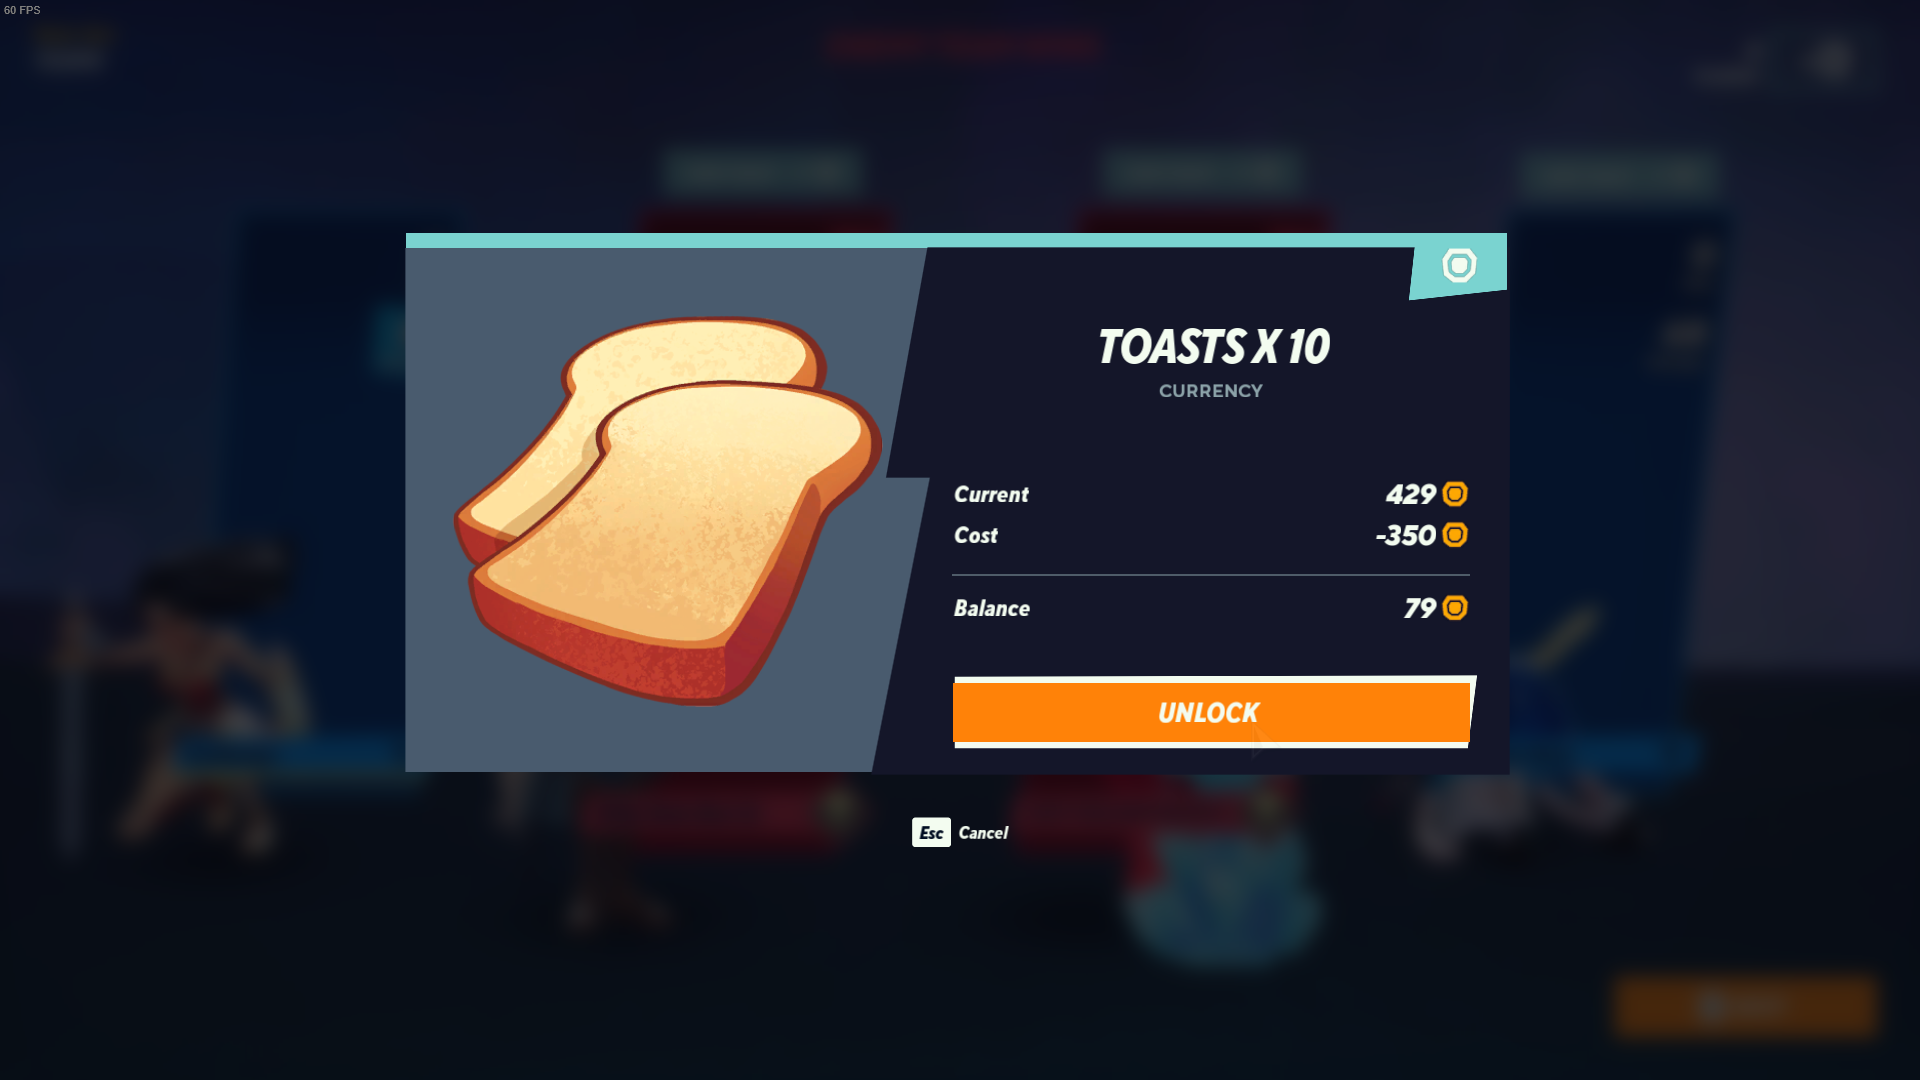 10x toast can be bought for 350 Gold in the post-match screen in MultiVersus.